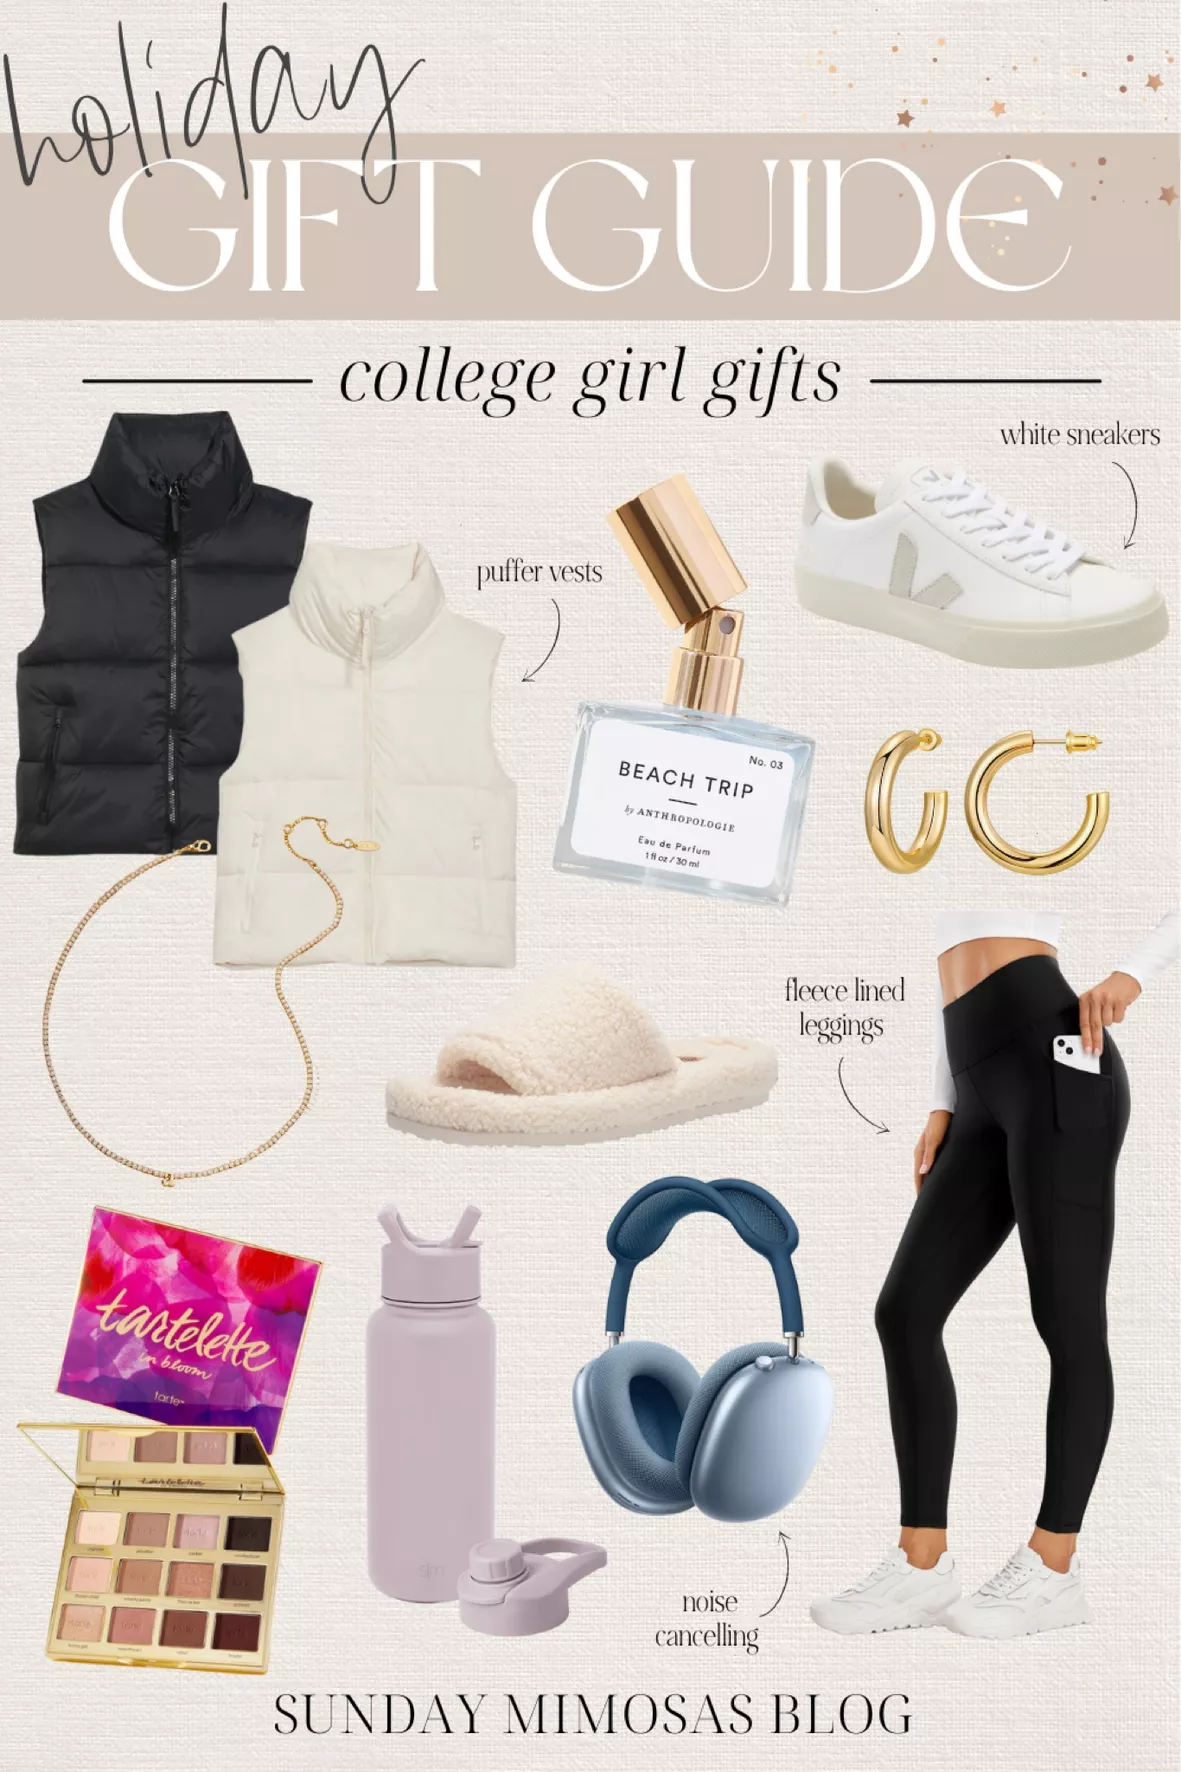 Gift Guide: College Students